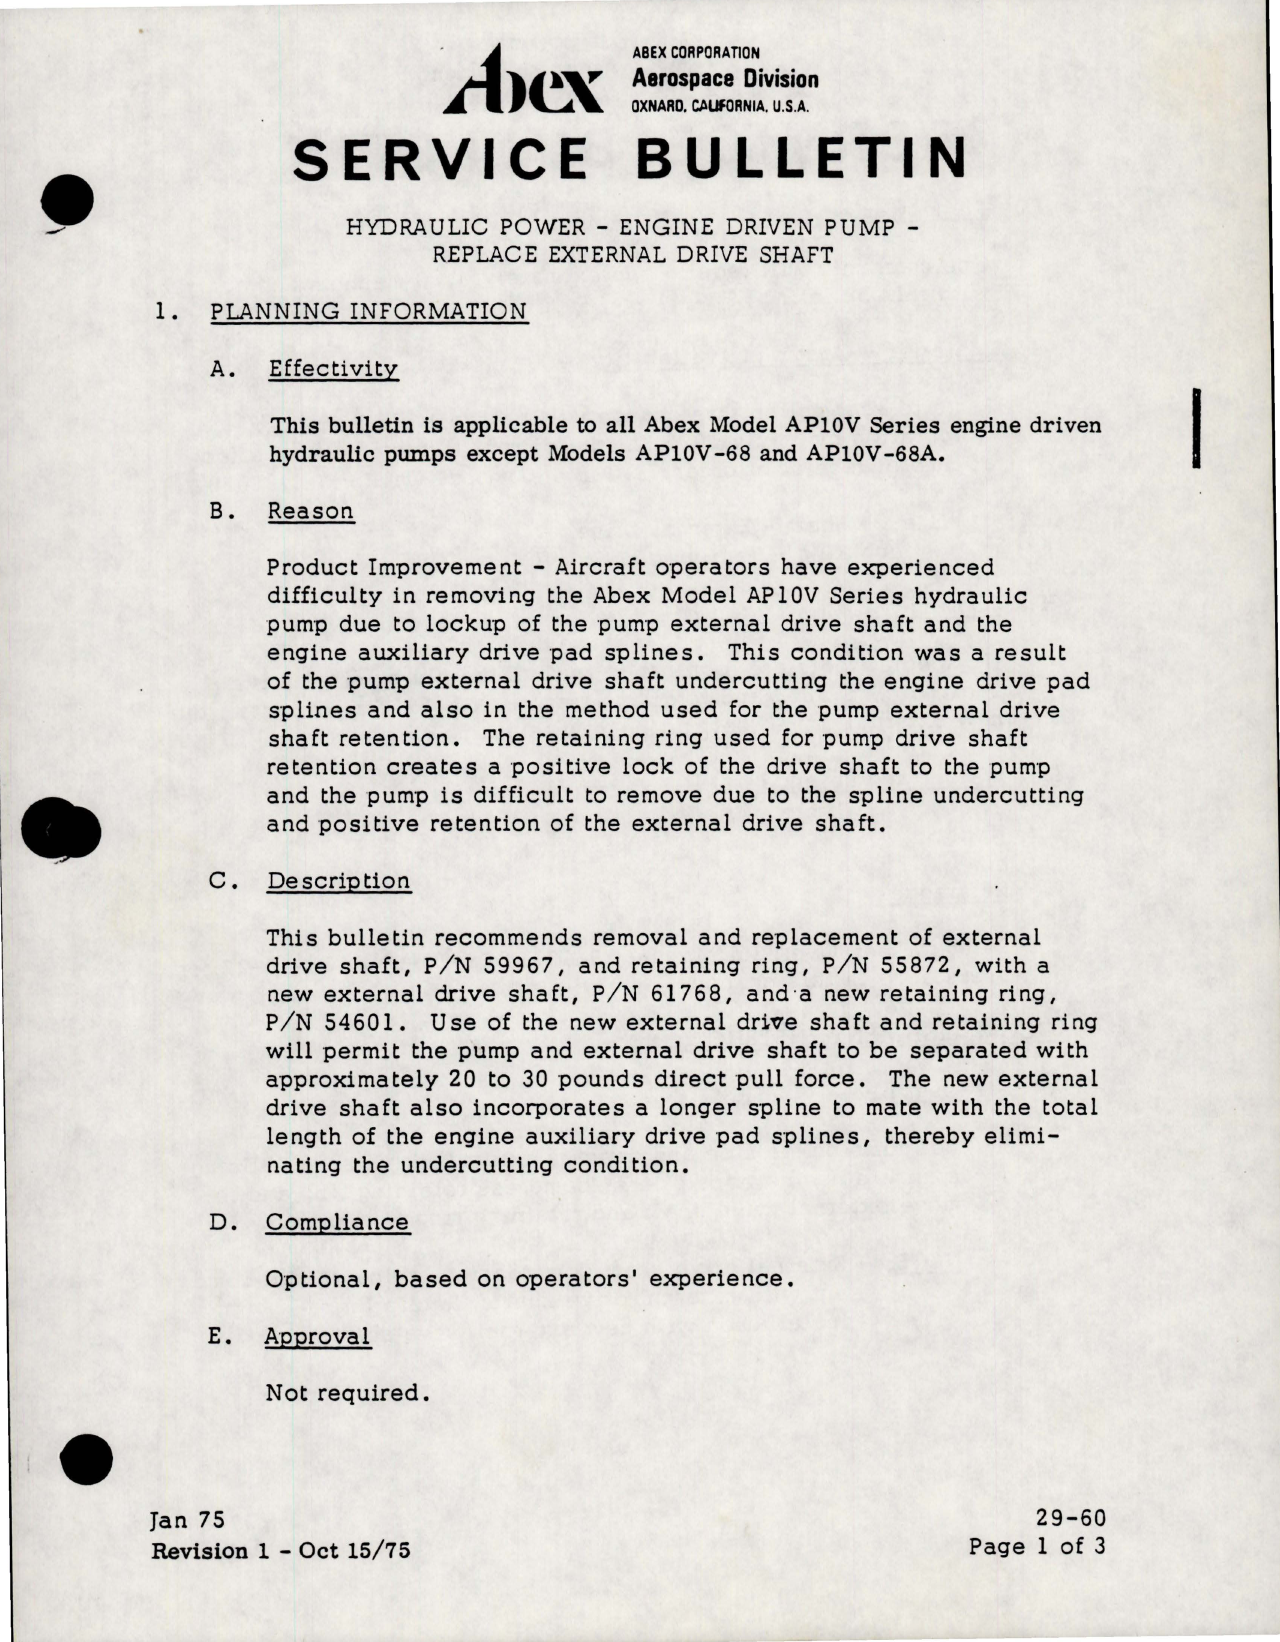 Sample page 1 from AirCorps Library document: Hydraulic Power - Engine Driven Pump - Model AP10V-68 and AP10V-68A - Product Improvement